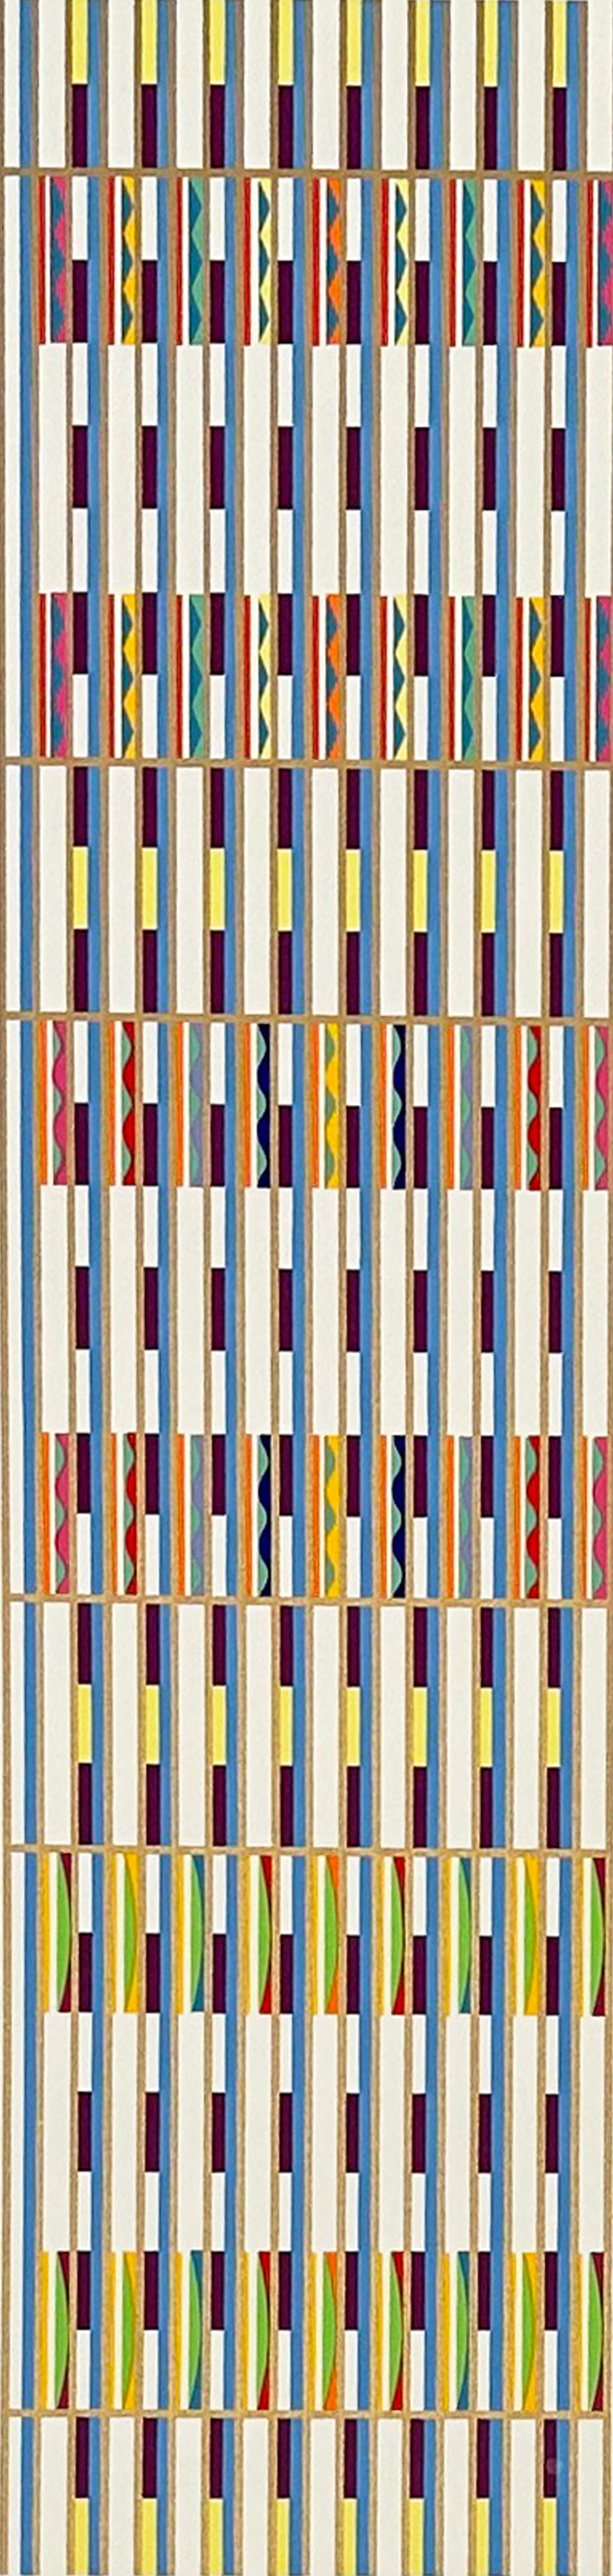 Yaacov Agam Portrait Print - Untitled, from Vertical Orchestration